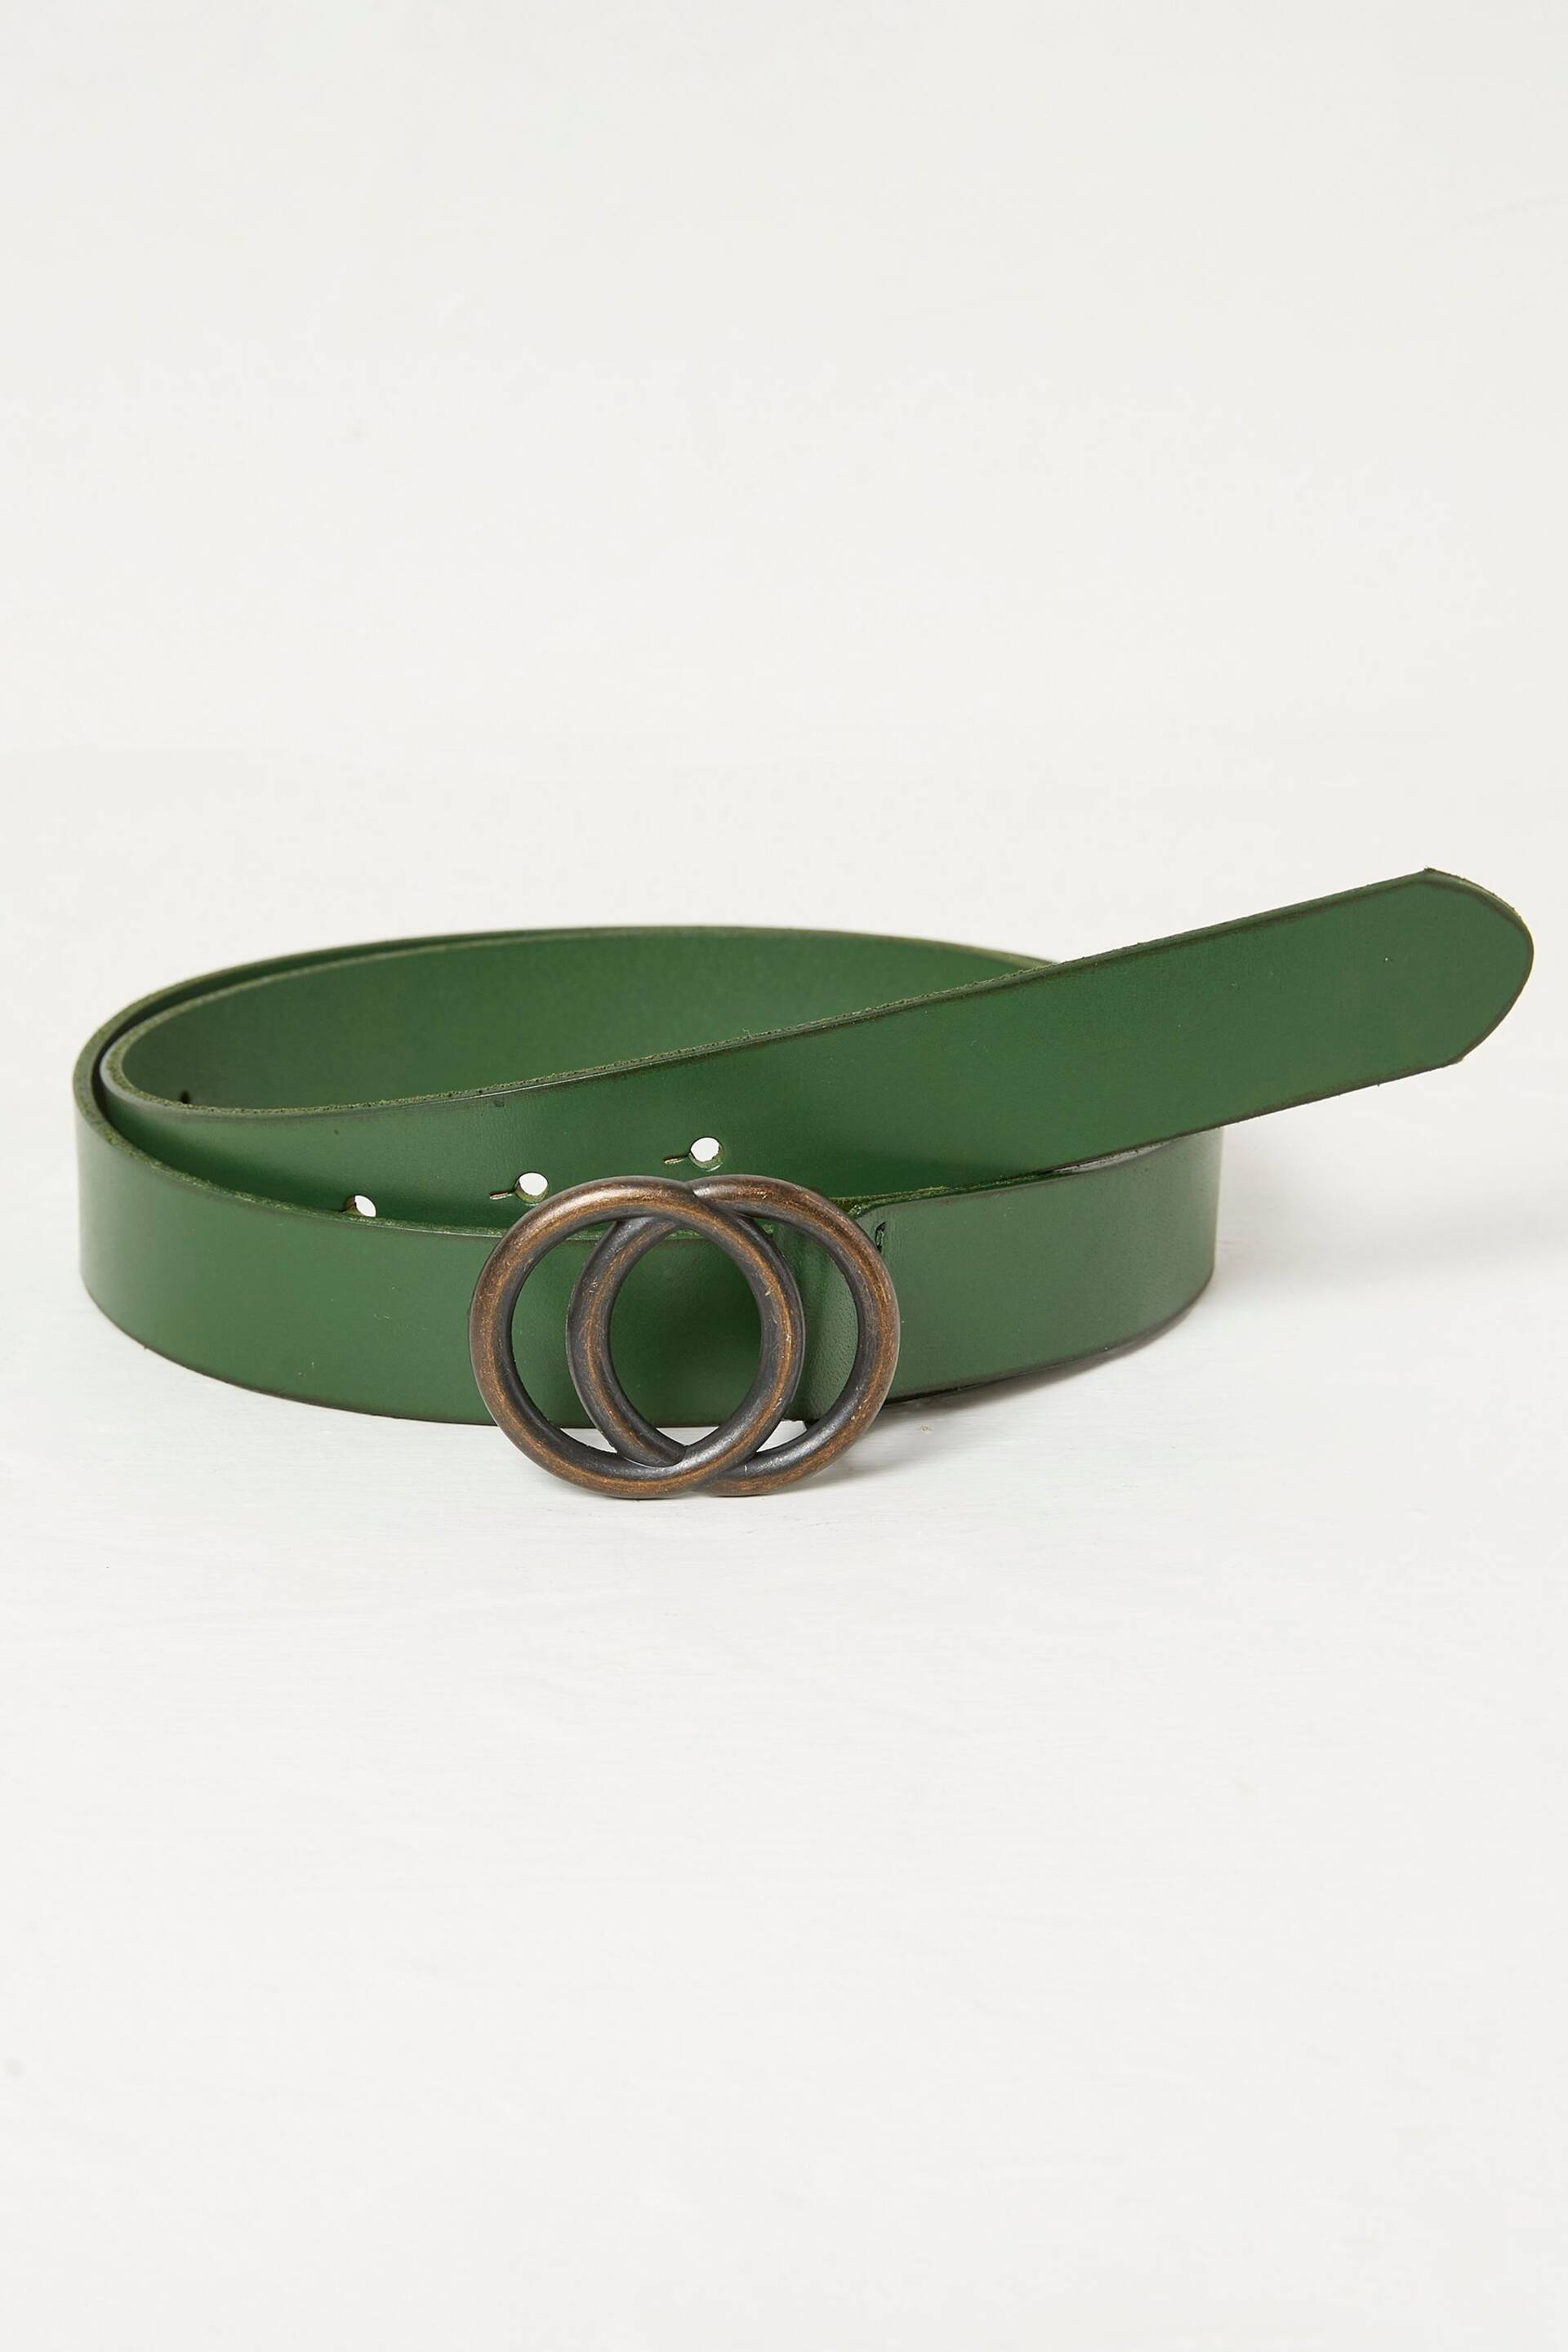 FatFace Green Jean Double Circle Belt - Image 1 of 2